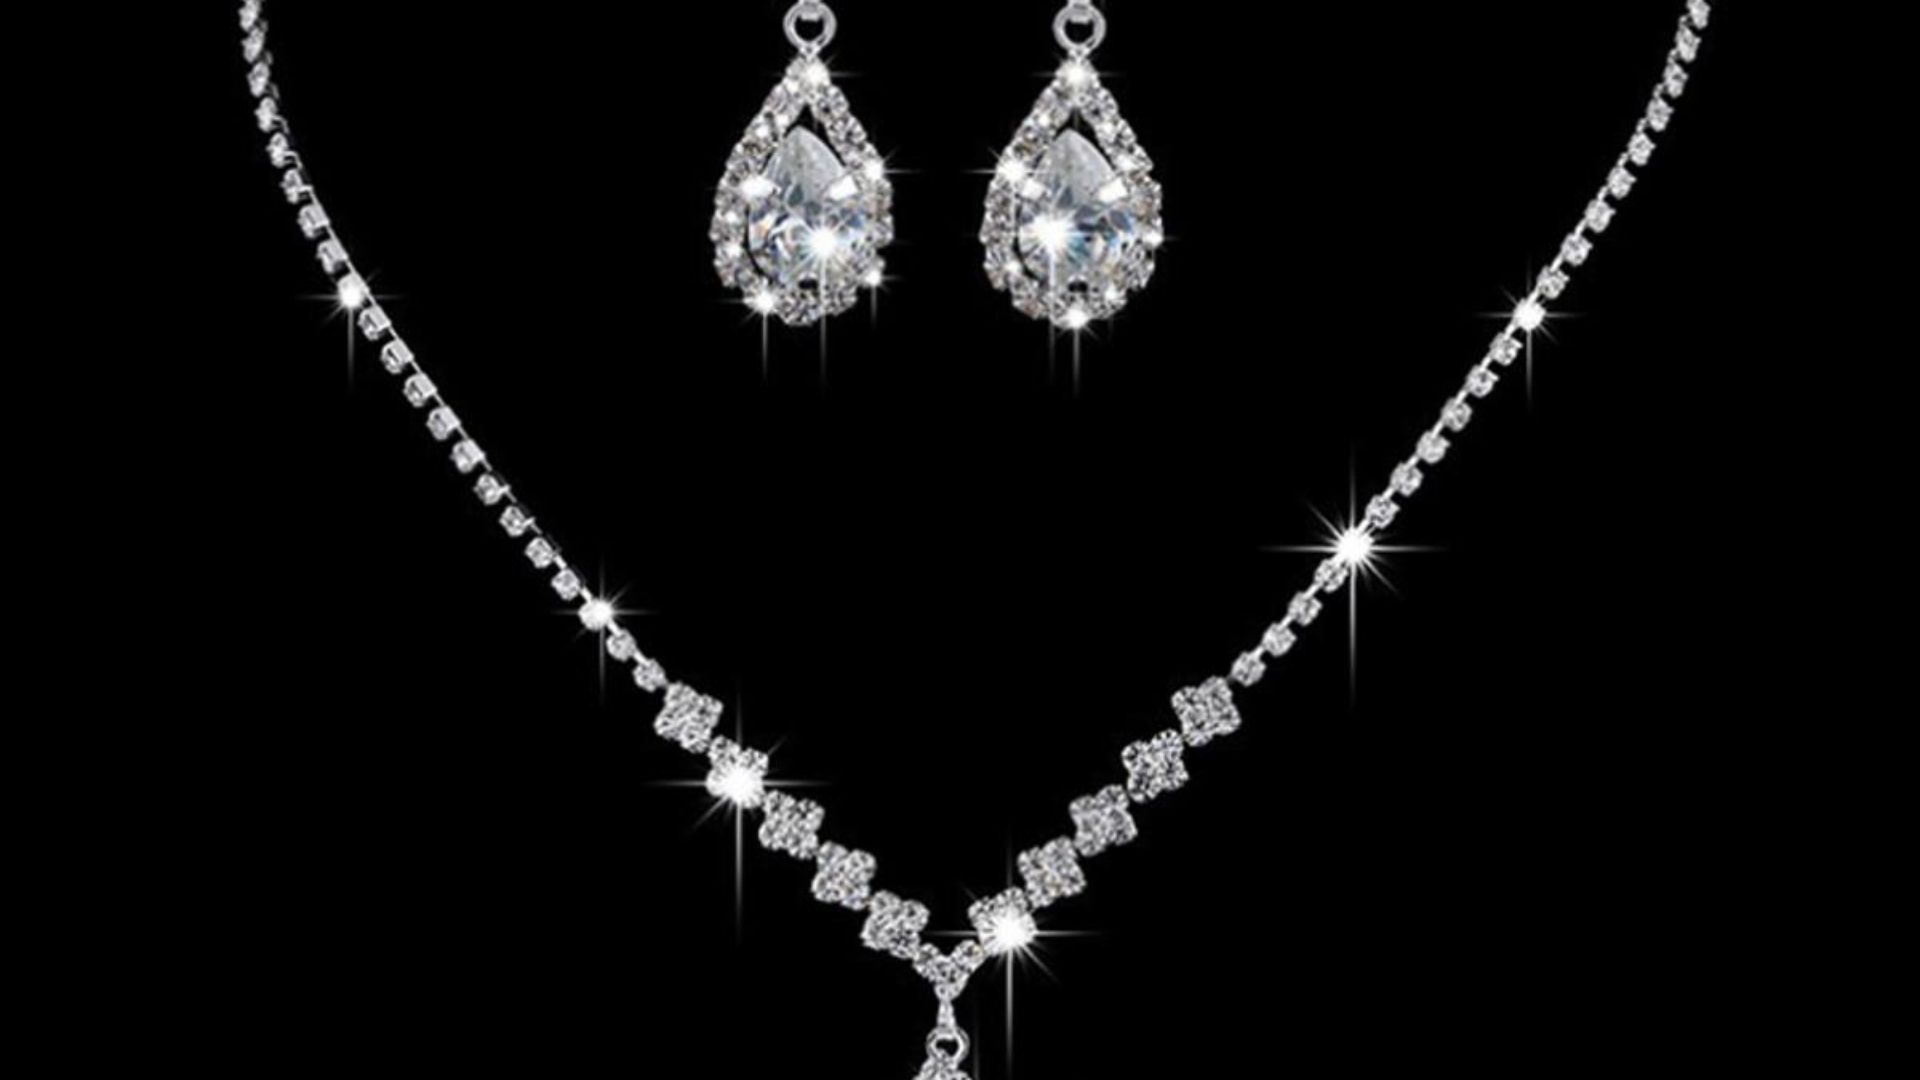 Wedding Silver Jewelry - The Perfect Accessory For Your Big Day